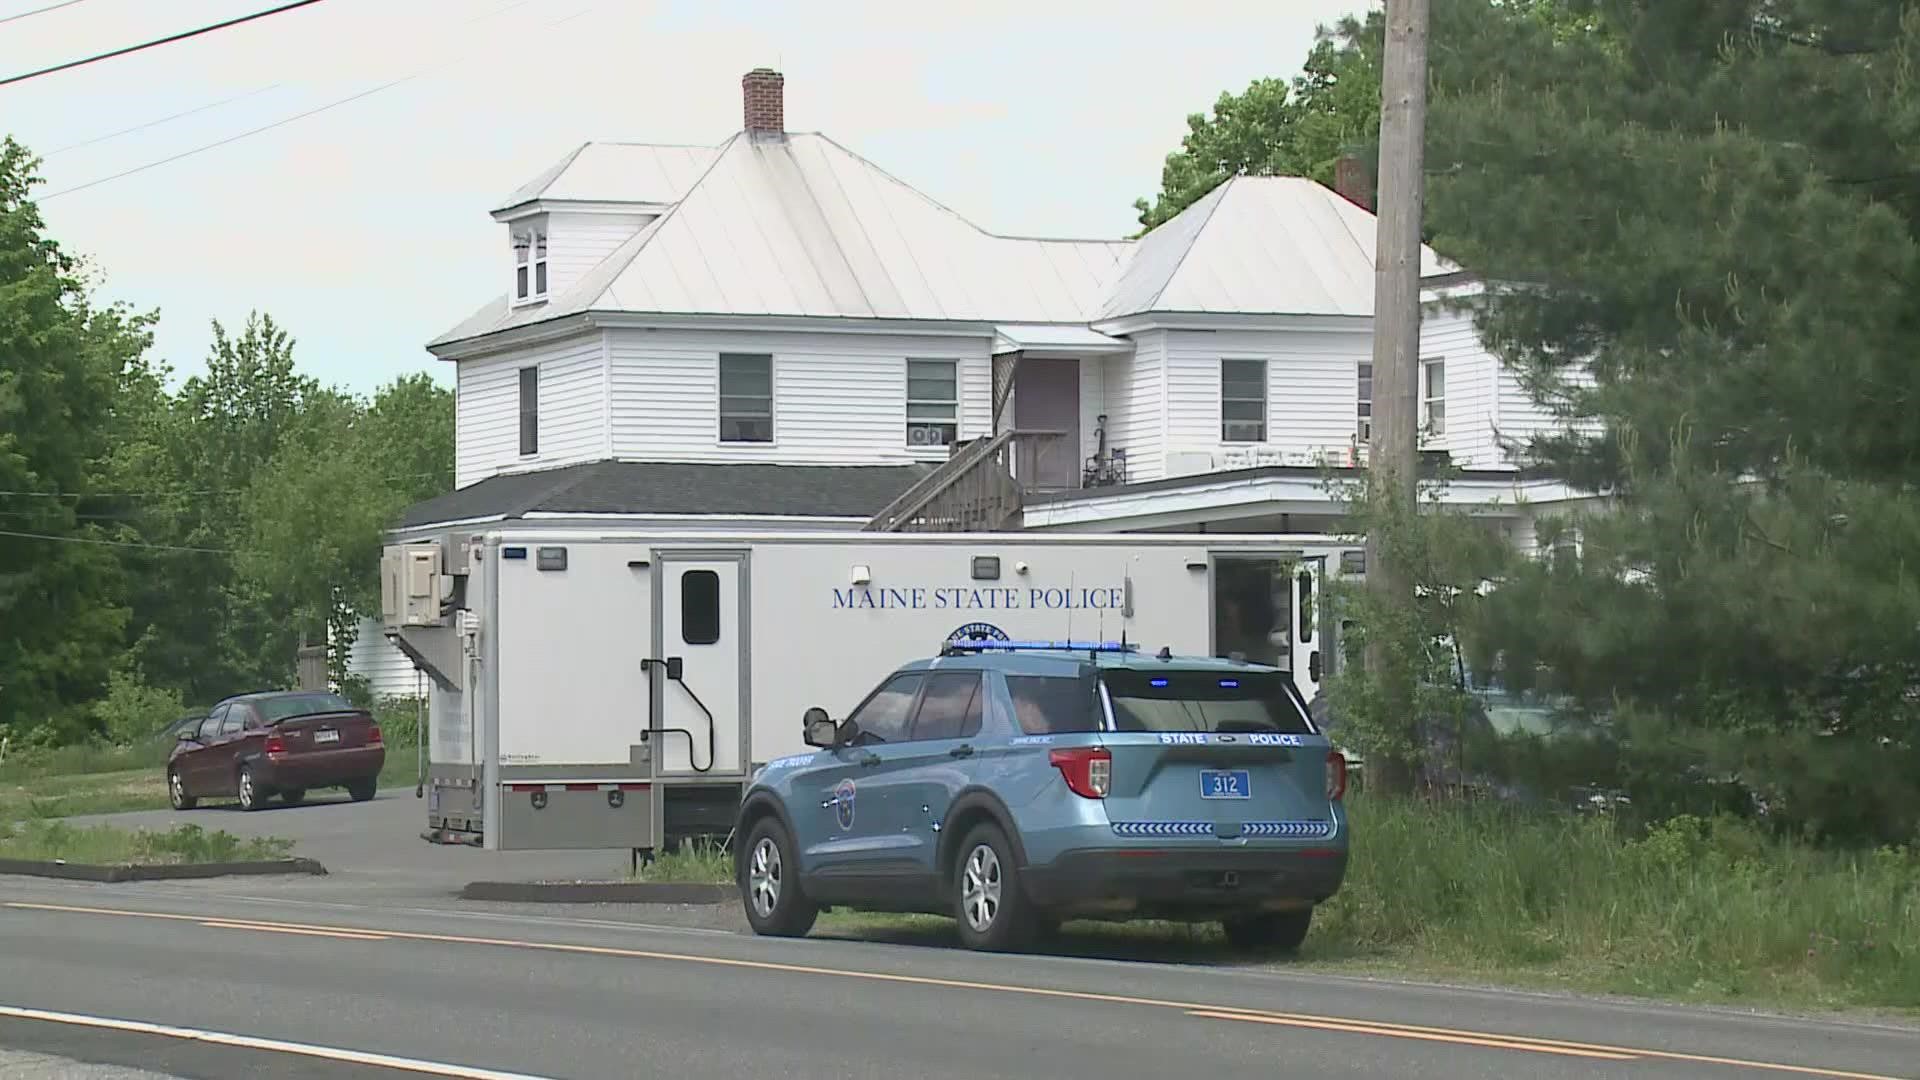 Jeremy Gilley, 37, died after being shot Monday inside an apartment building in Vassalboro.